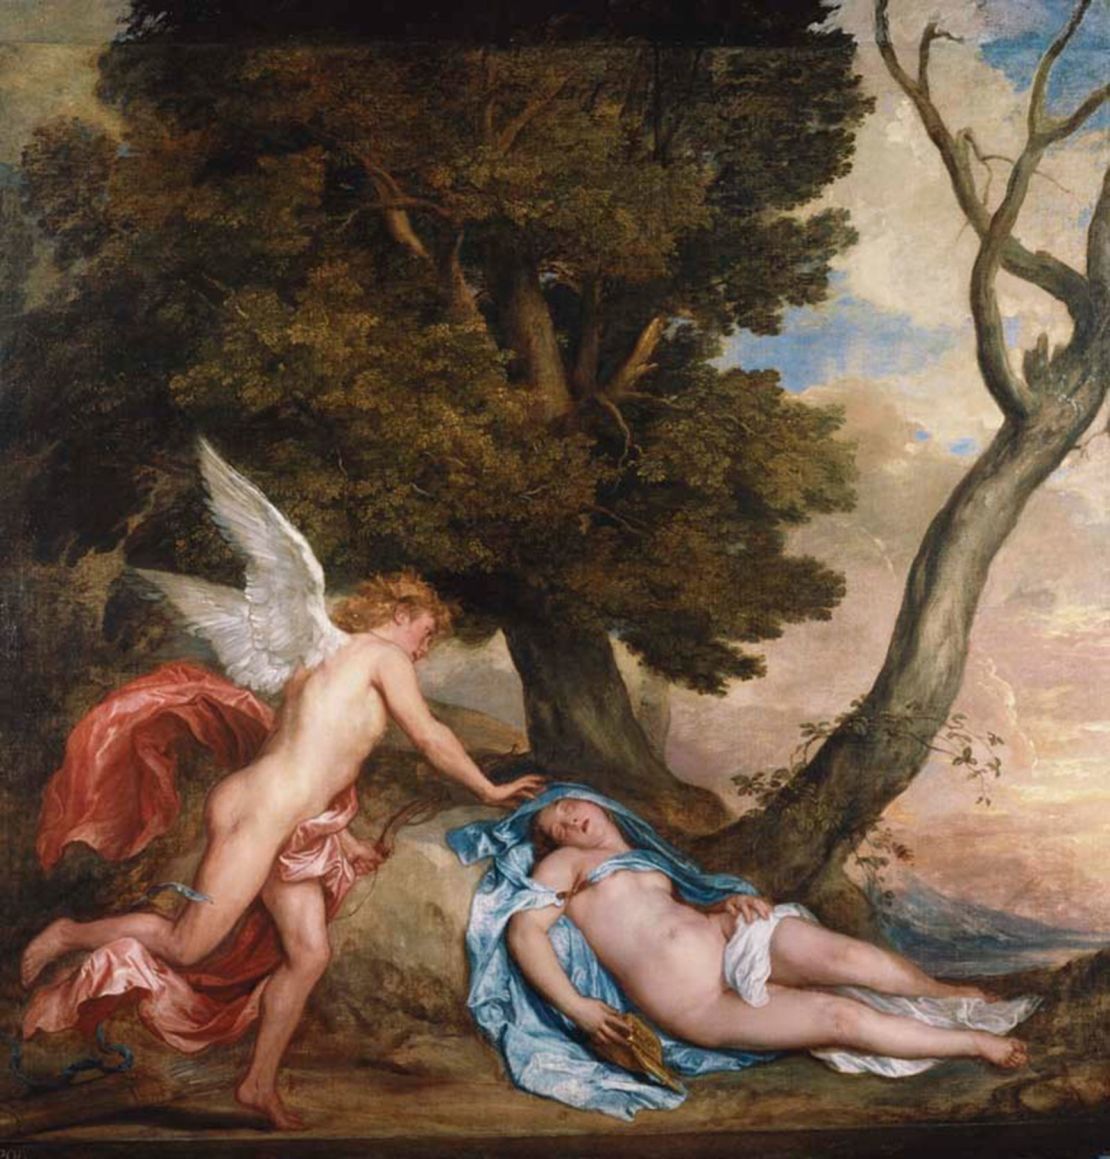 Cupid and Psyche (1639-40) by Anthony van Dyck